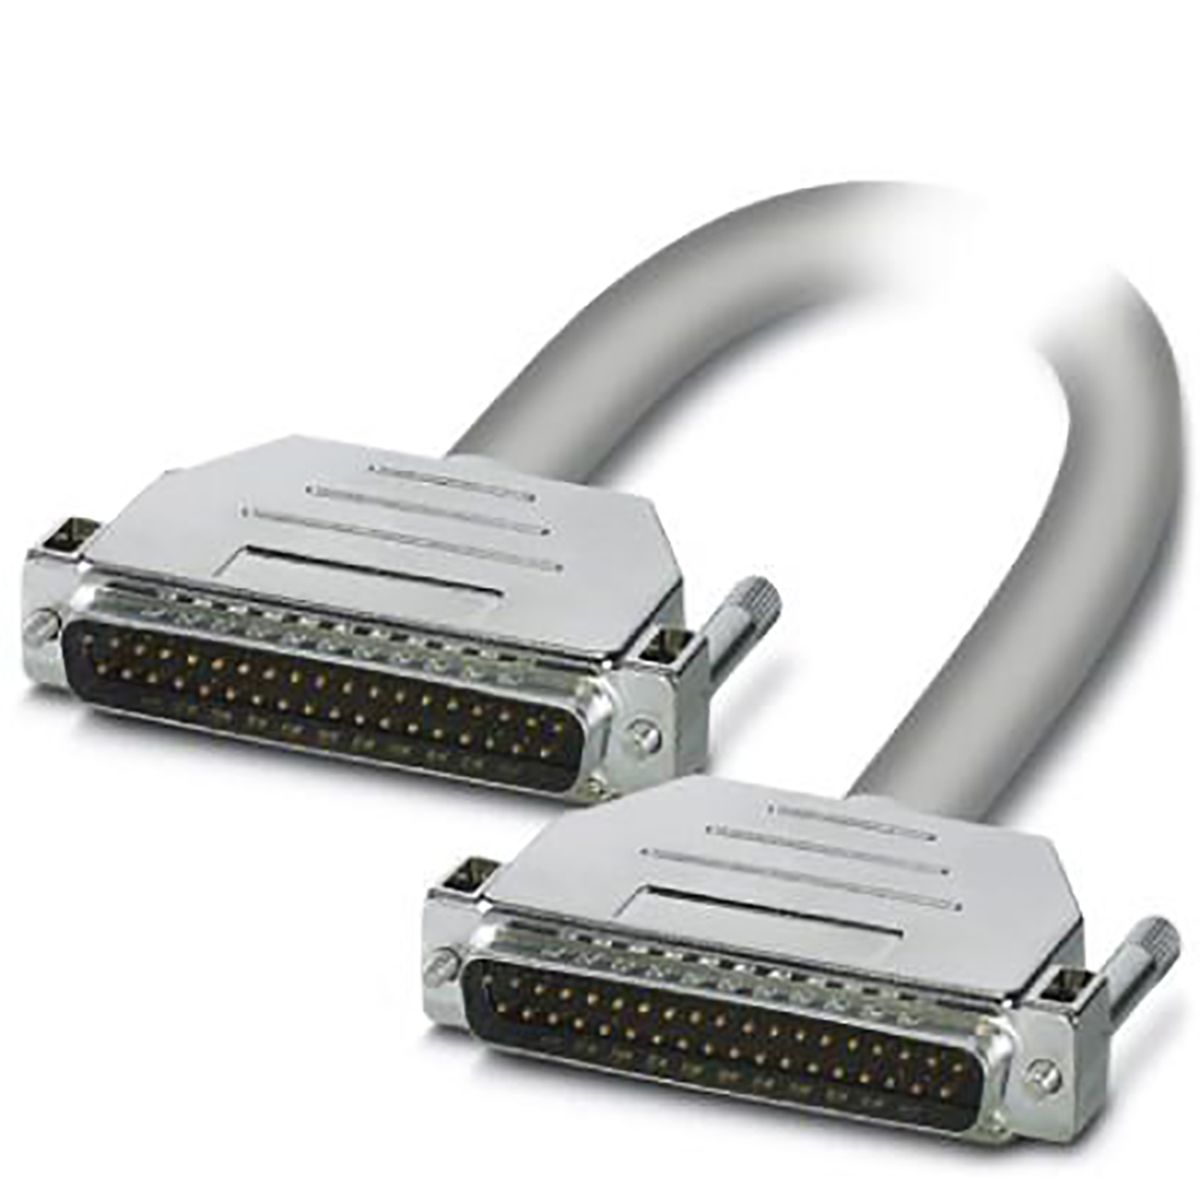 Phoenix Contact 3m 37 pin D-sub to 37 pin D-sub Serial Cable